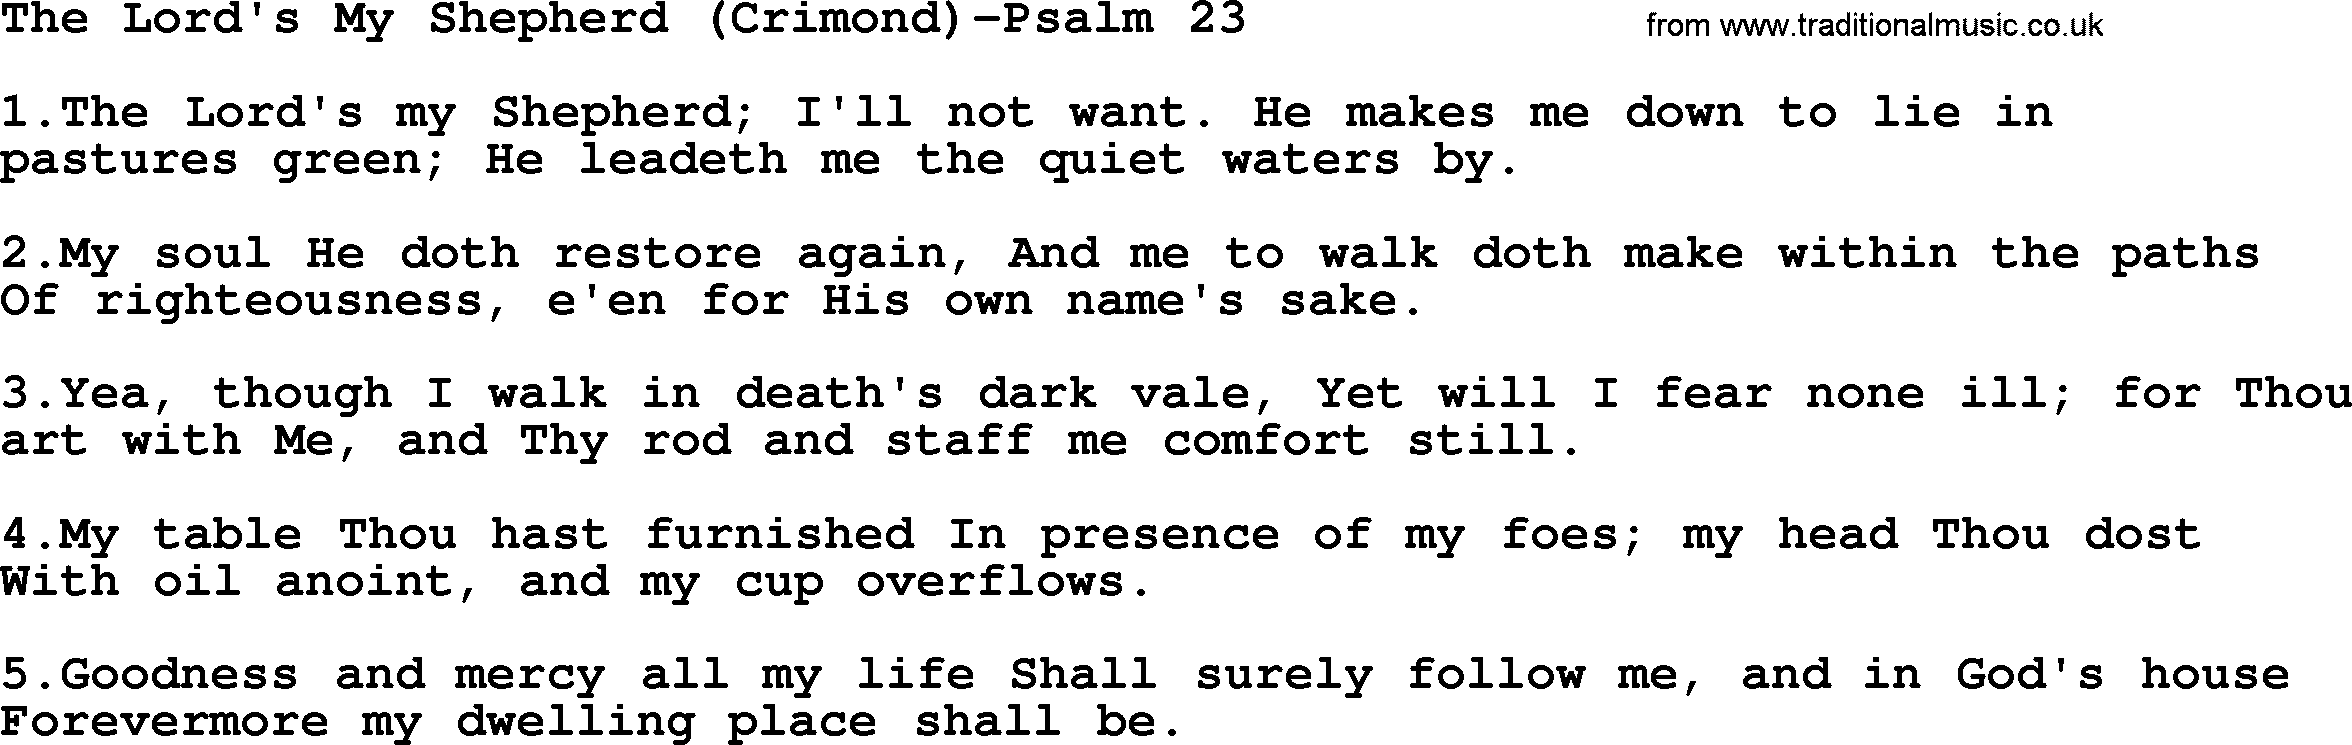 Hymns from the Psalms, Hymn: The Lord's My Shepherd (Crimond)-Psalm 23, lyrics with PDF